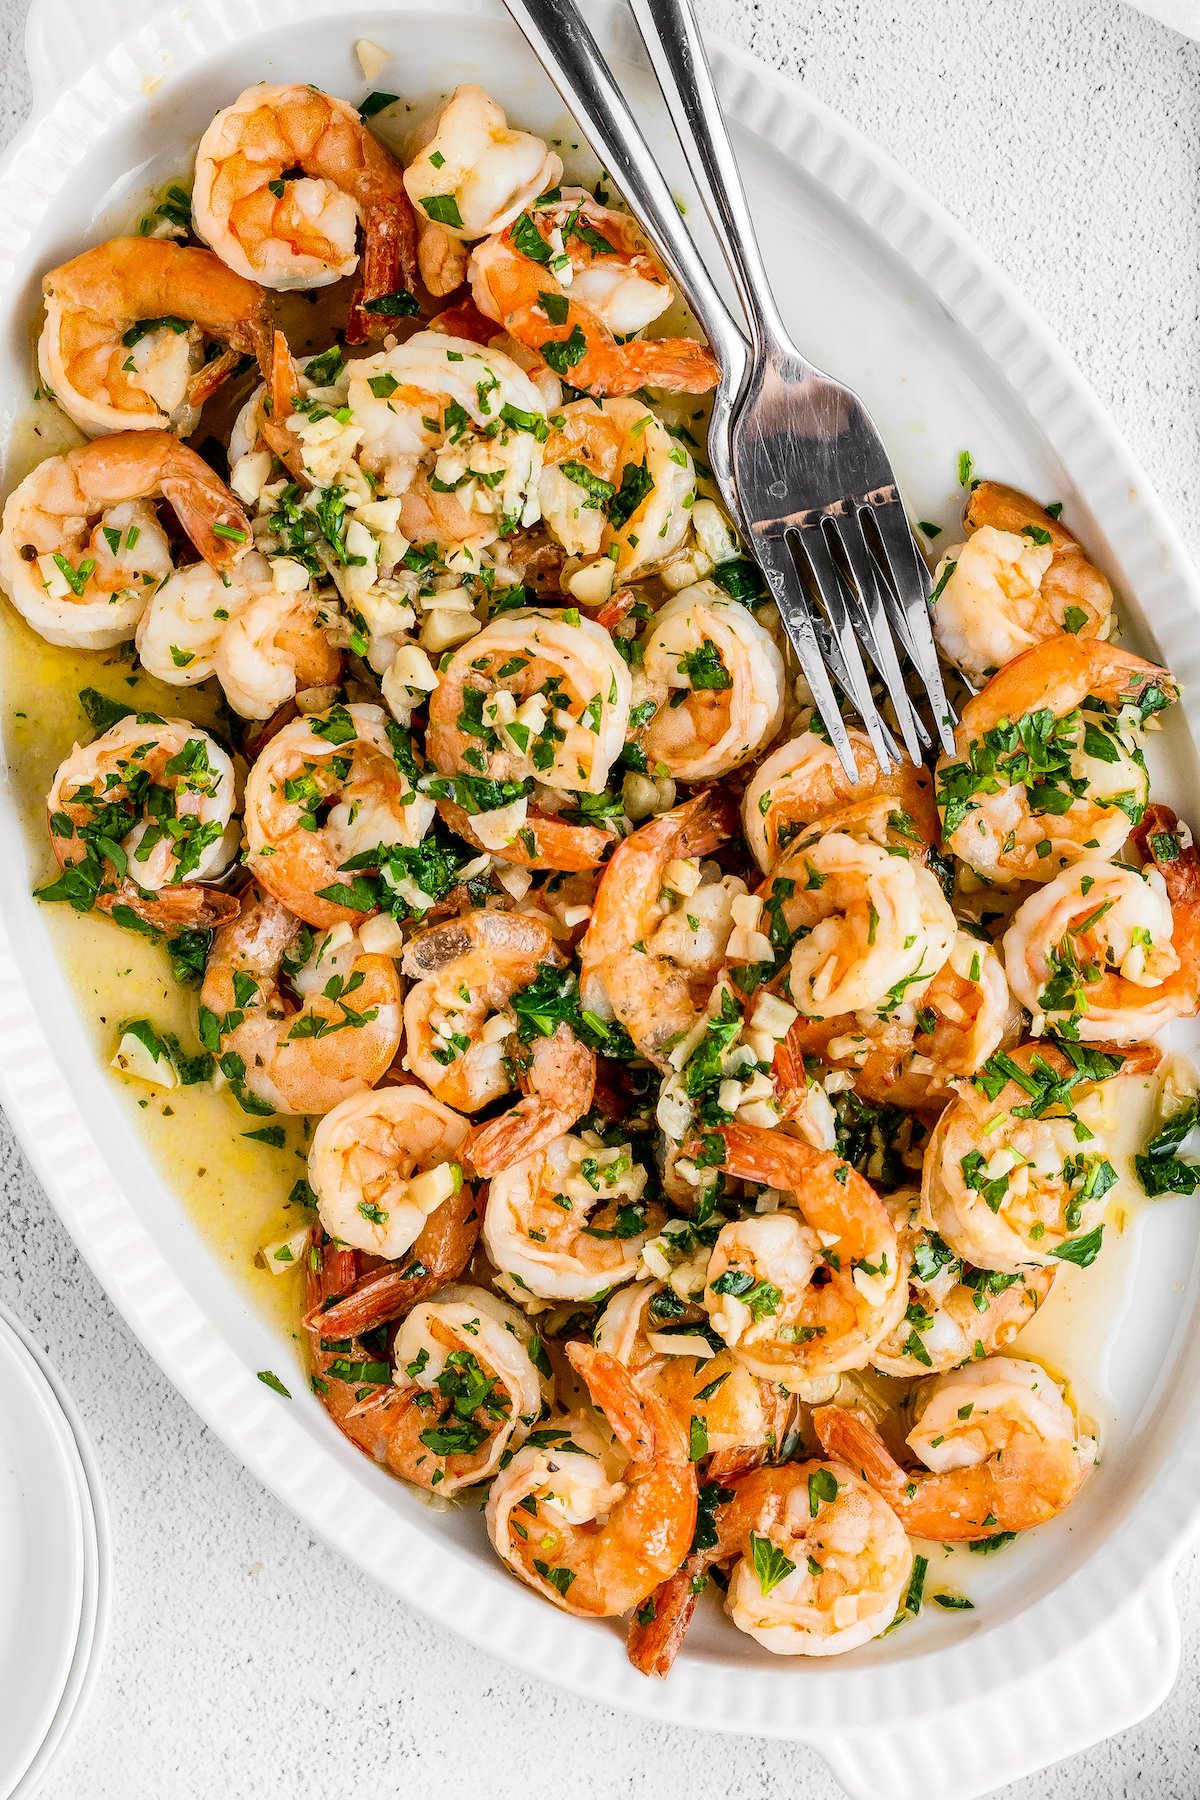 An oval-shaped serving platter with shrimp in a garlic and parsley sauce.